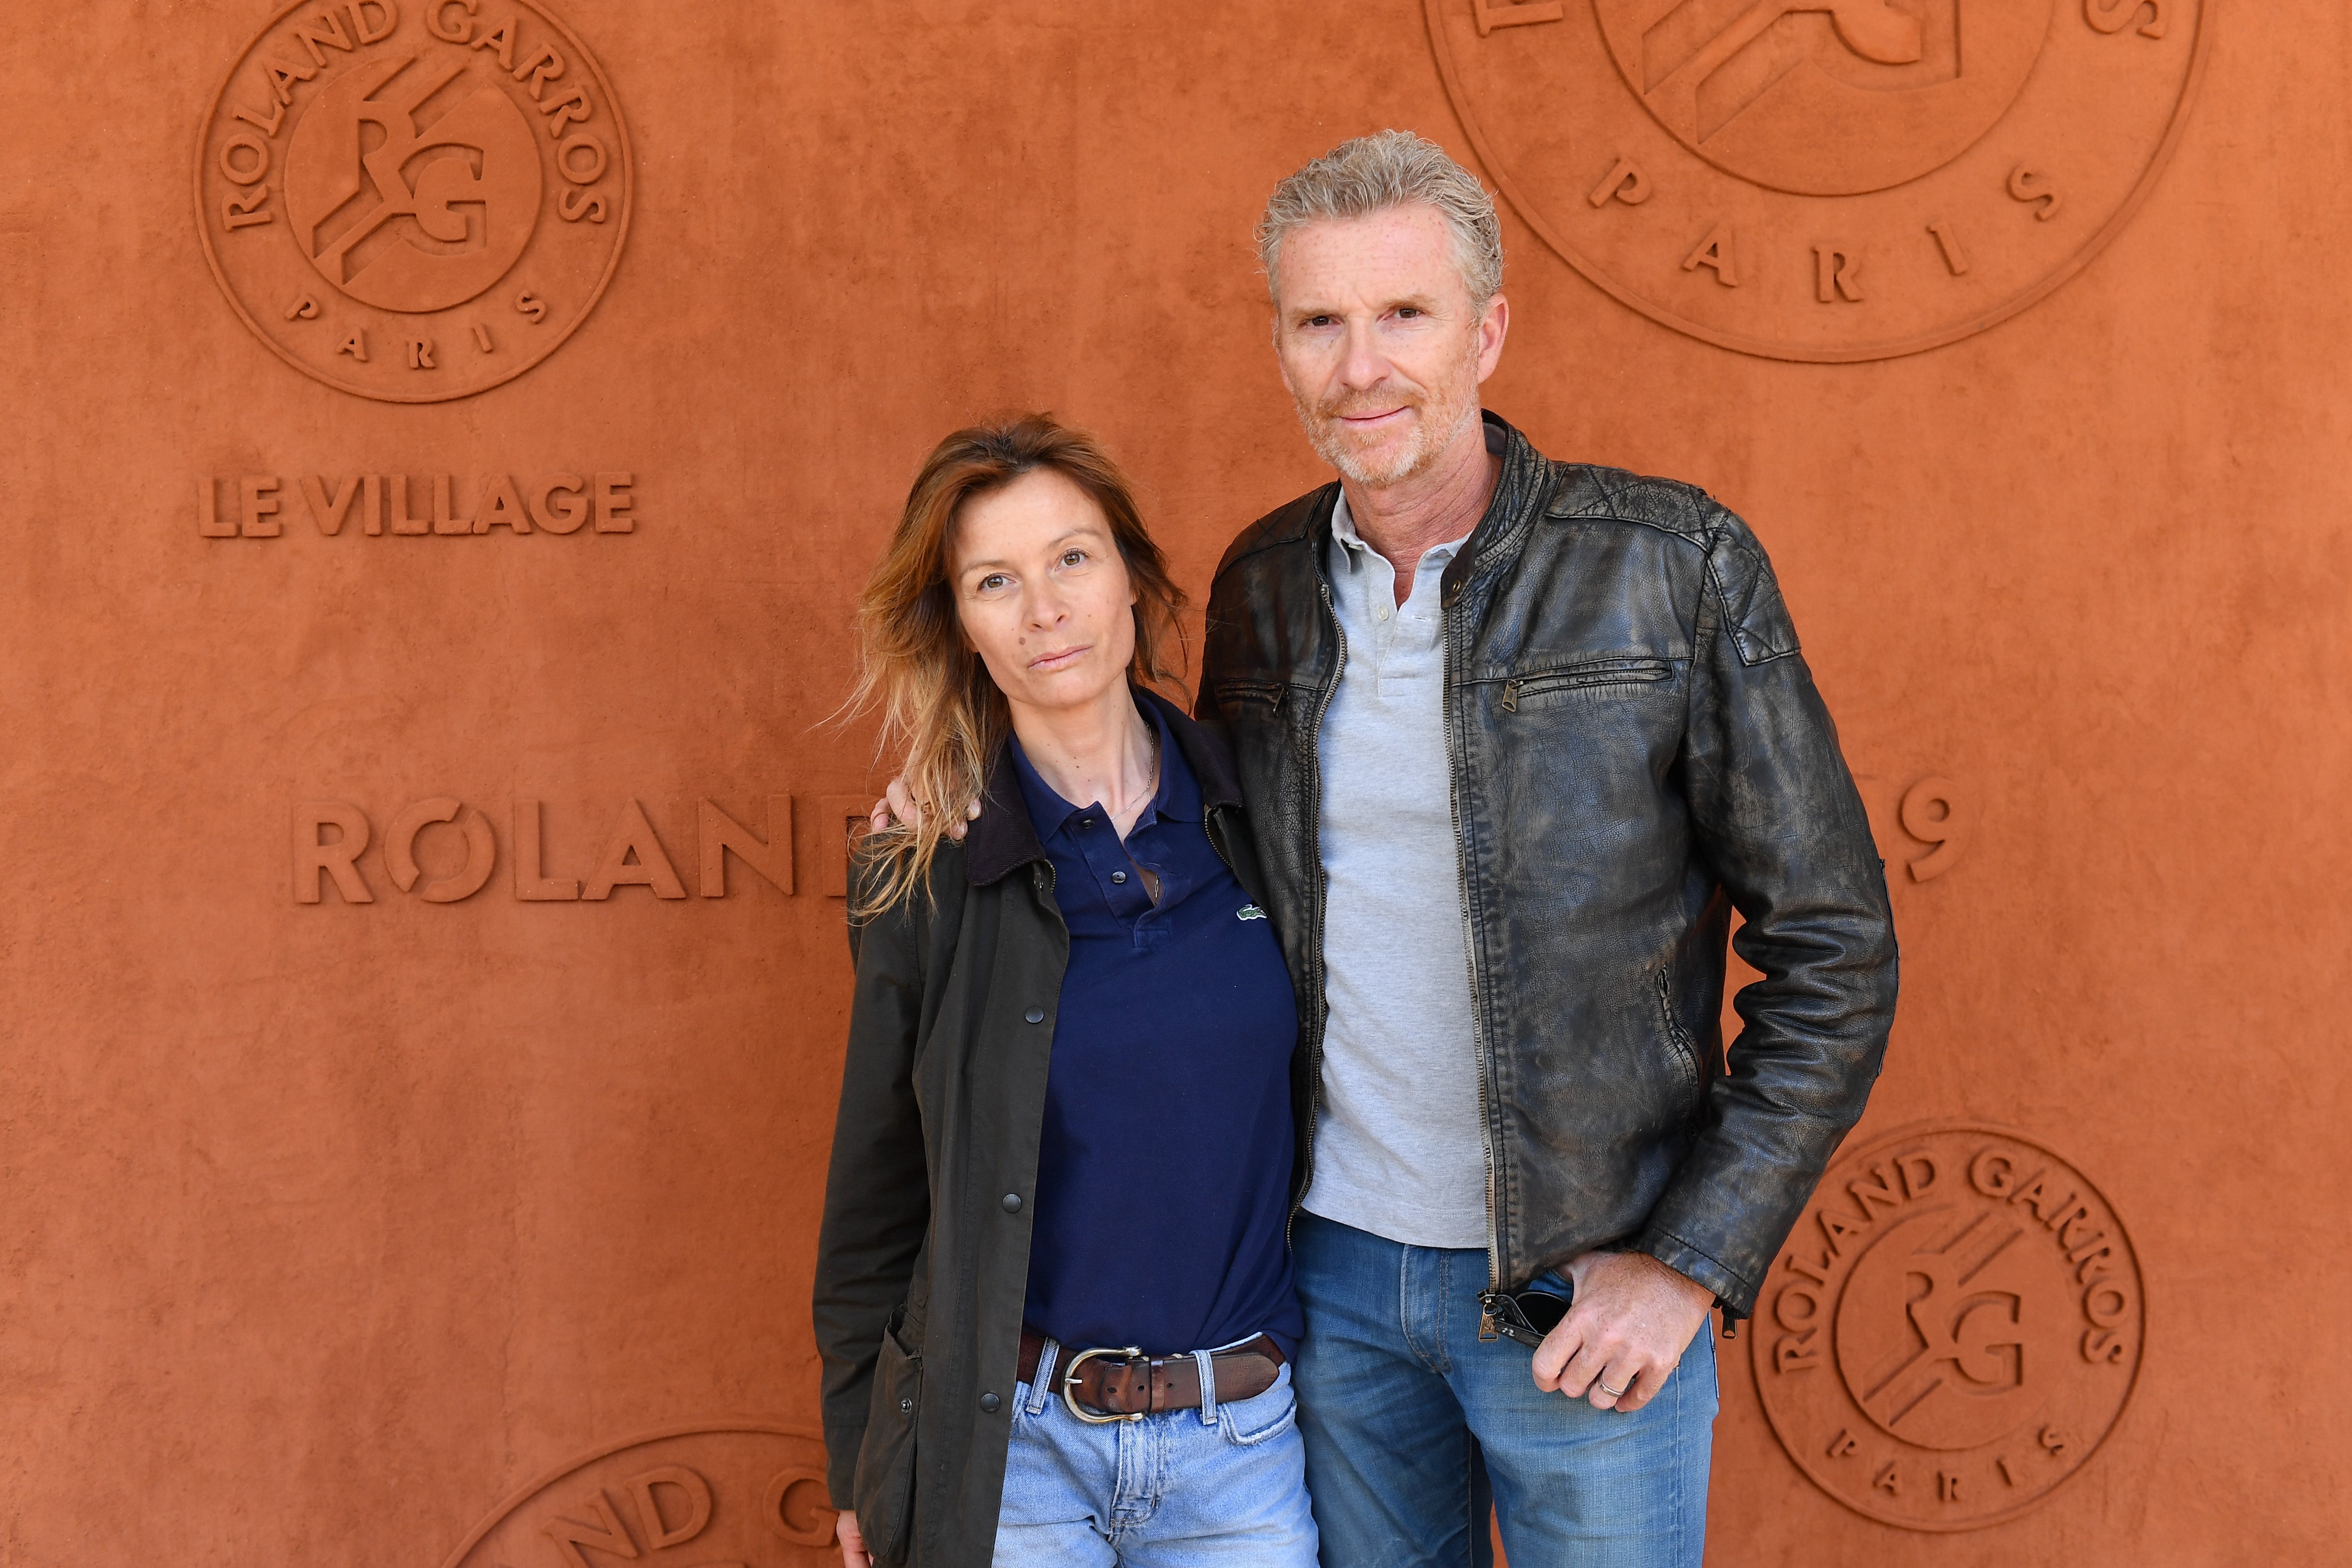 TV host Denis Brogniart and his wife Hortense will participate in the 2019 French Open Tennis - Day 12 at Roland Garros on June 6, 2019 in Paris, France.  |  Source: Getty Images